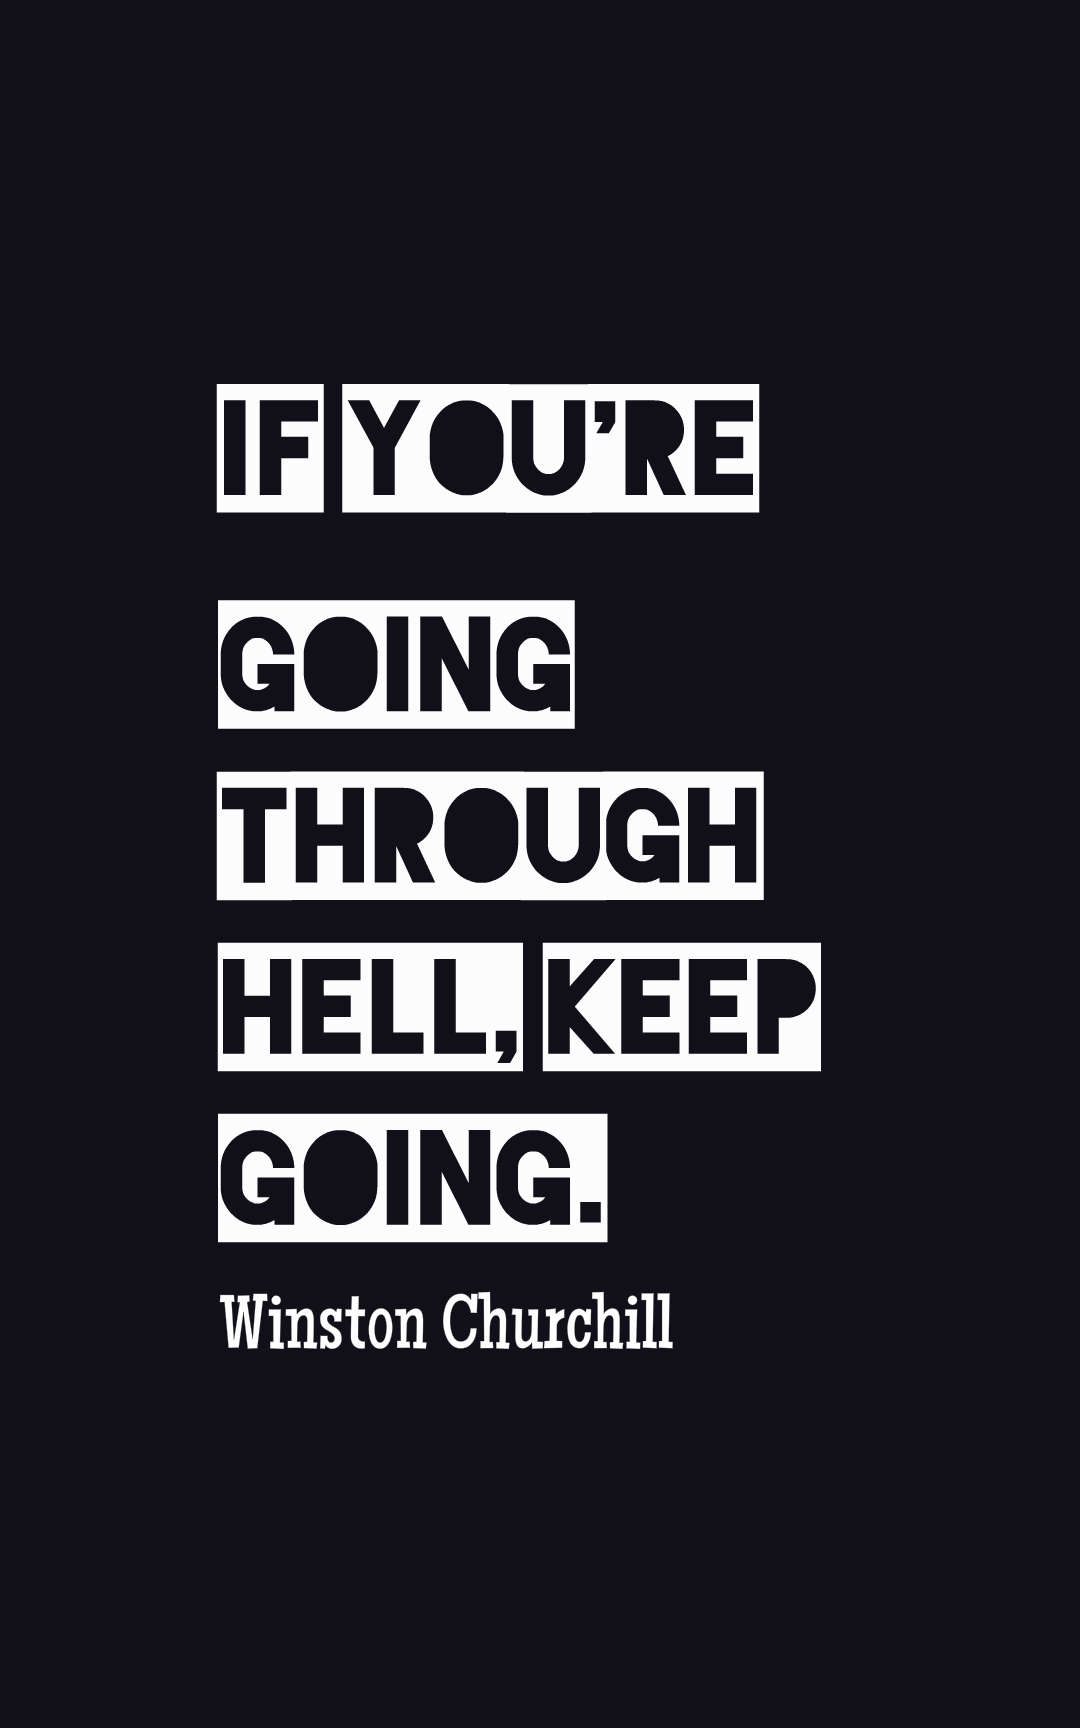 If youre going through hell keep going.